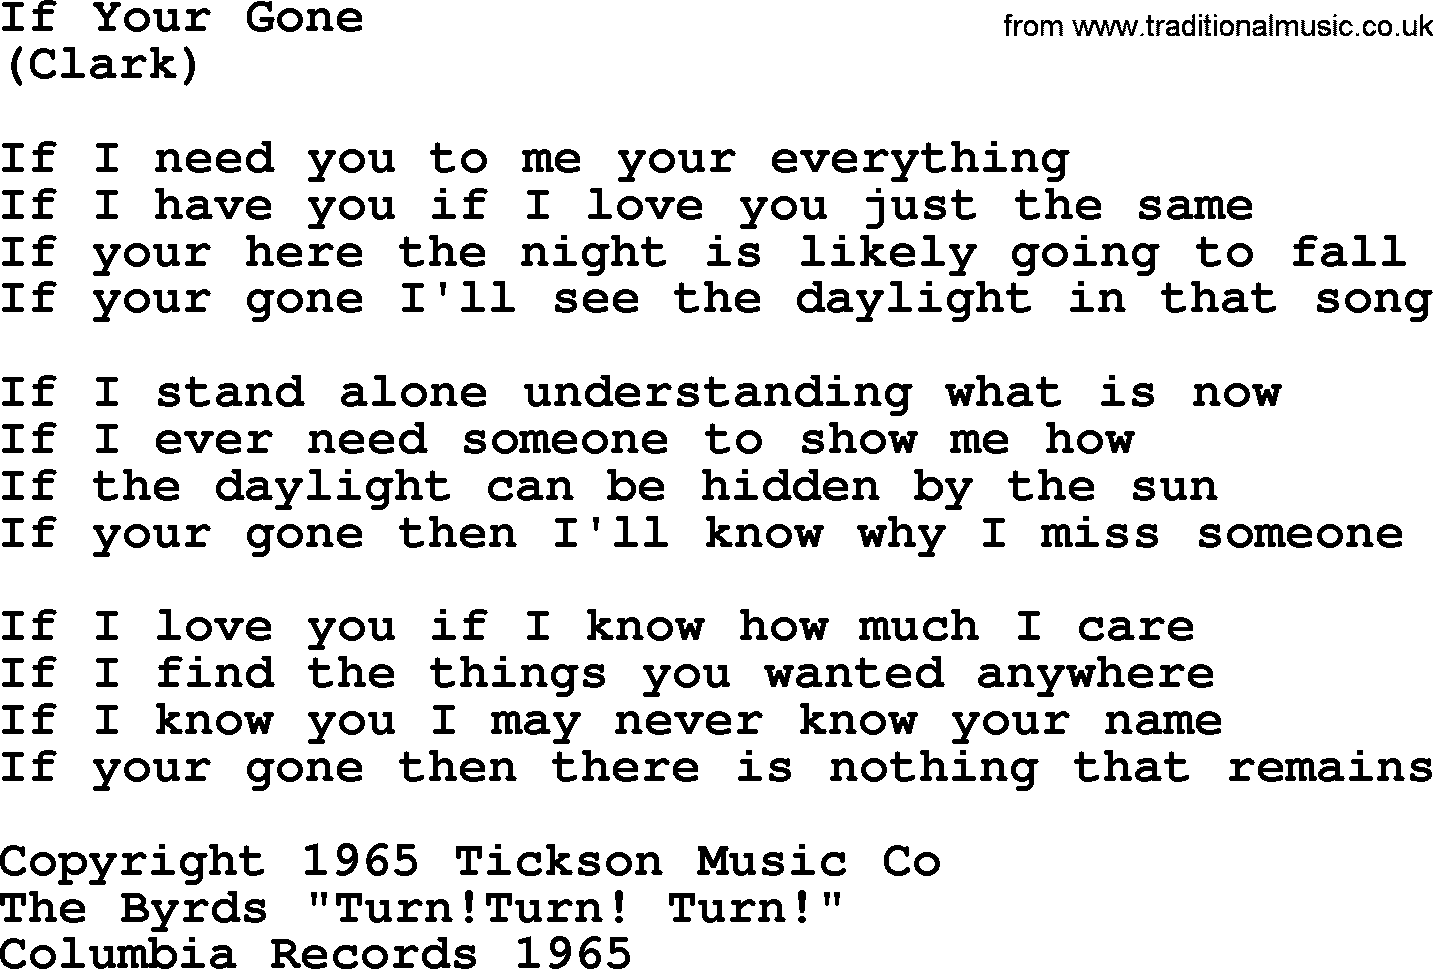 The Byrds song If Your Gone, lyrics